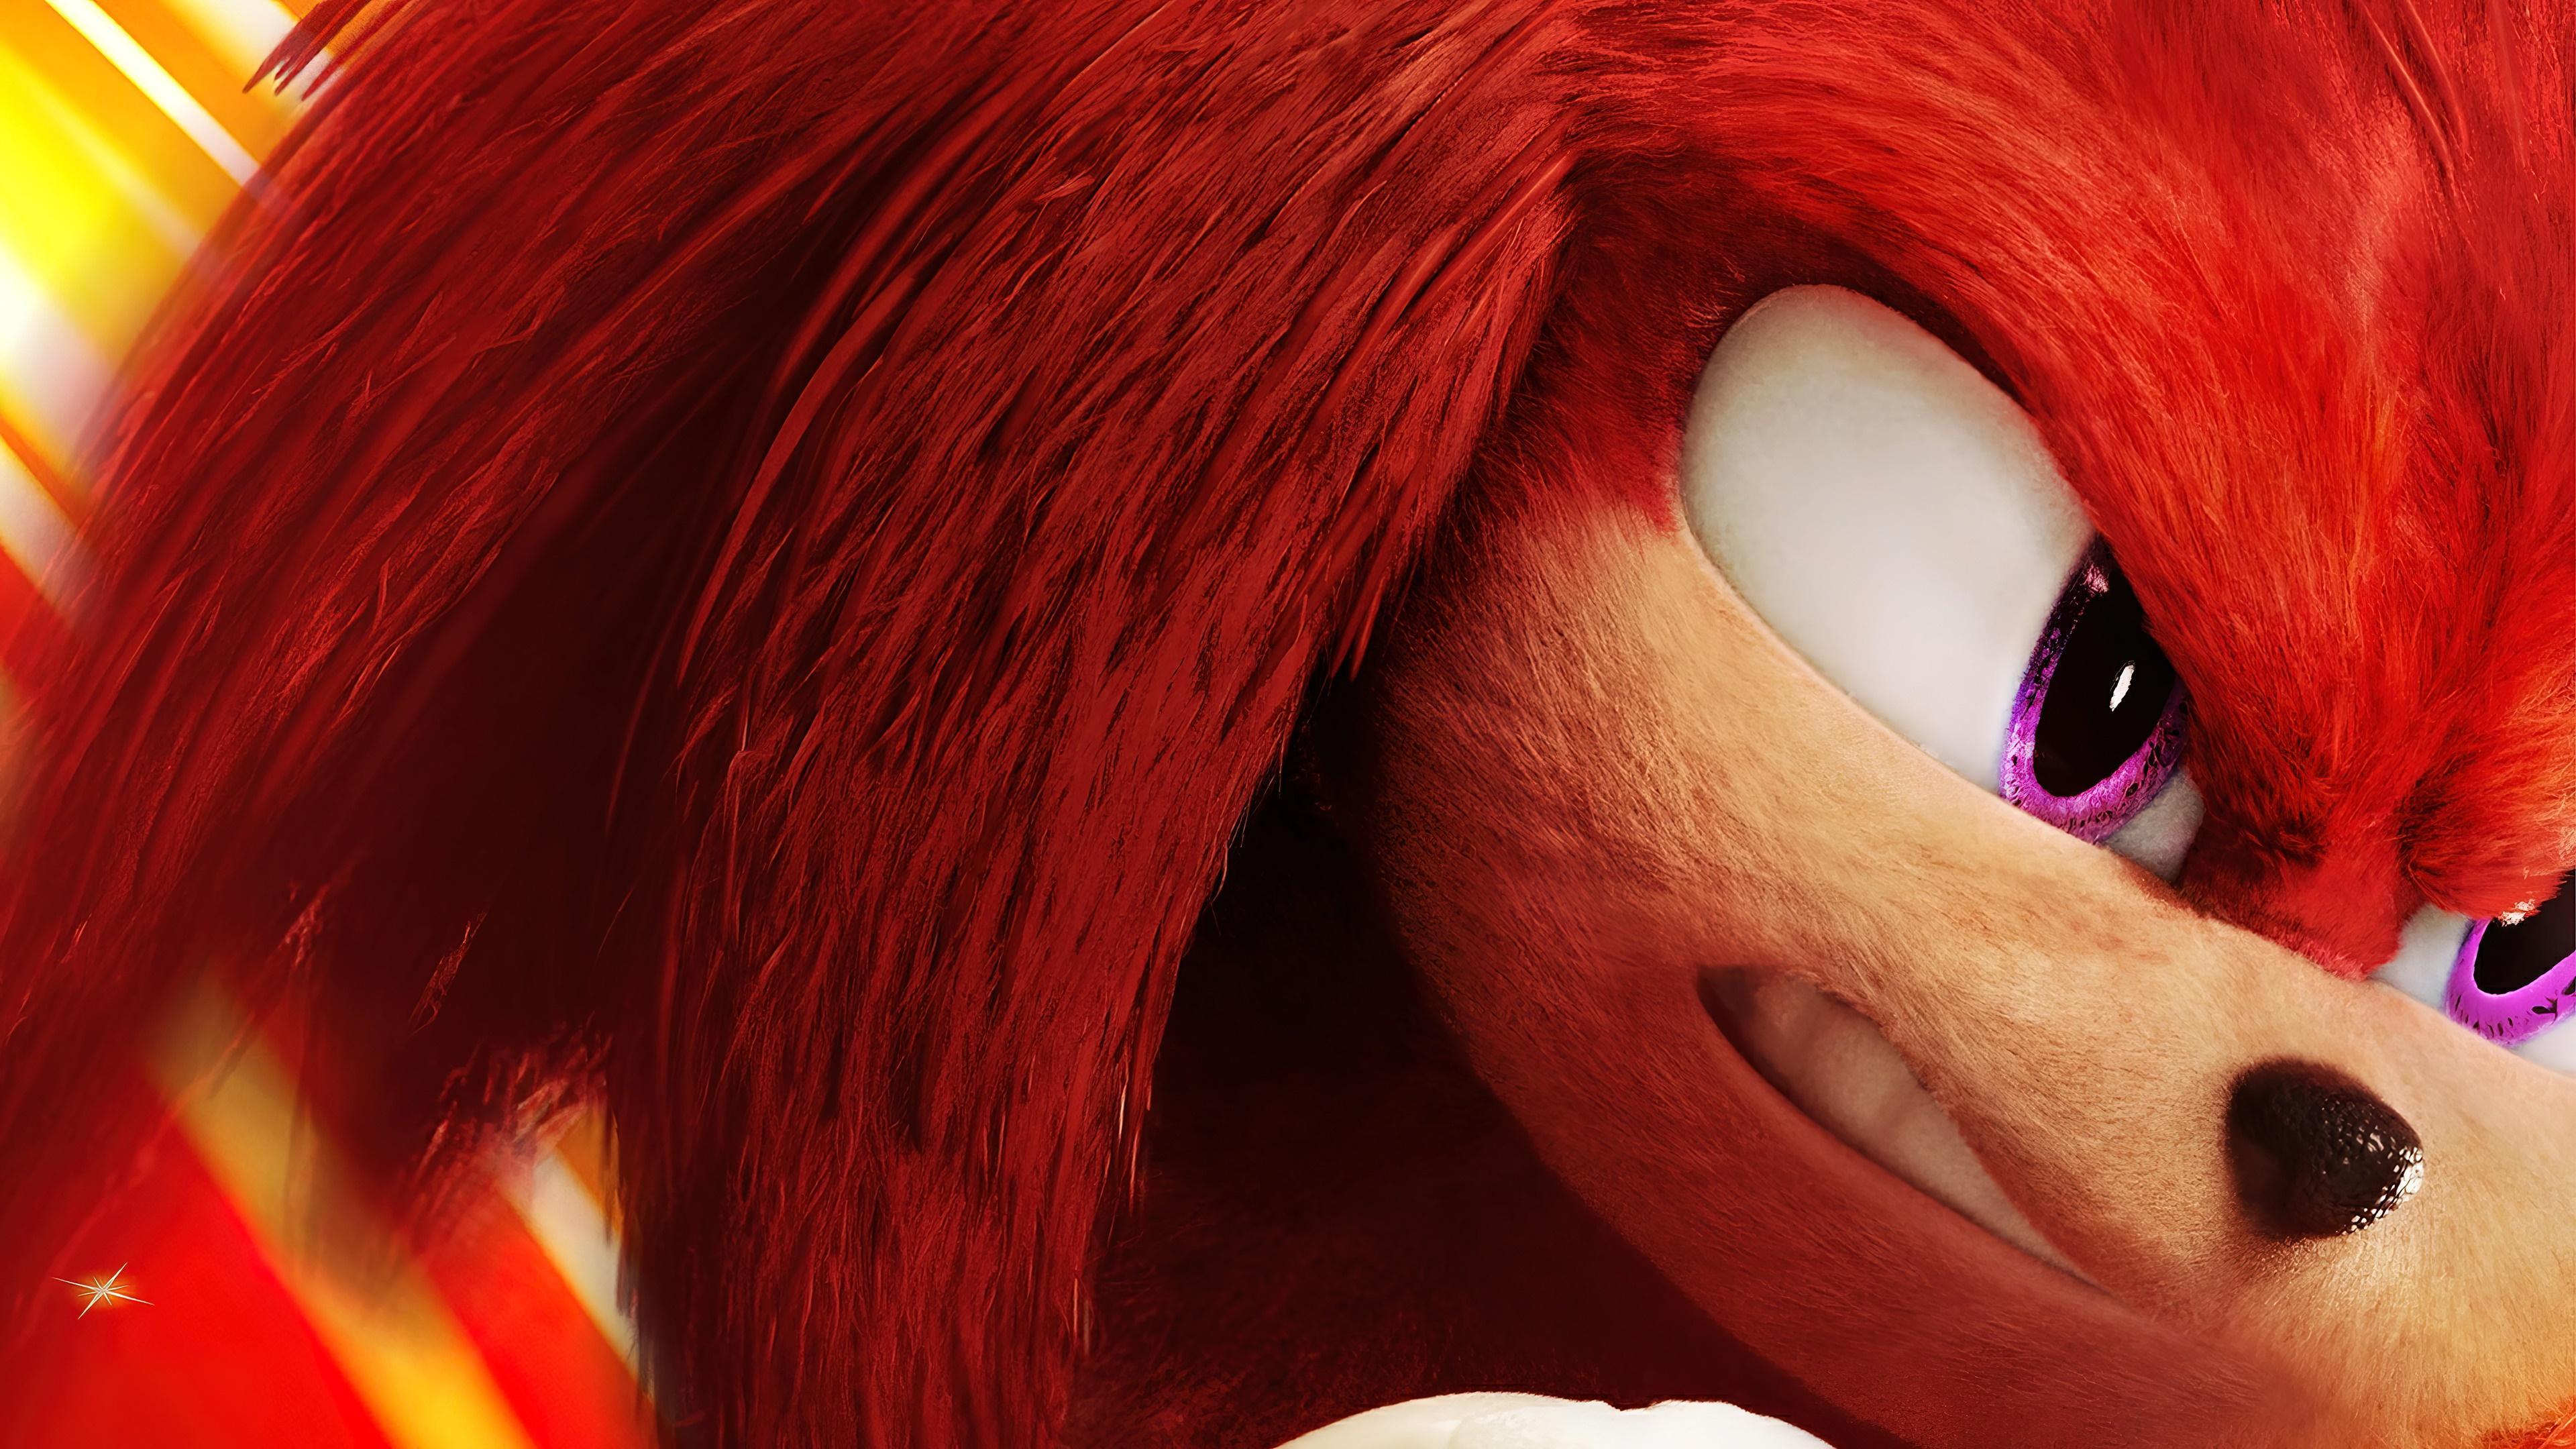 HD wallpaper, Poster, Sonic 2, 4K, Movie, Knuckles